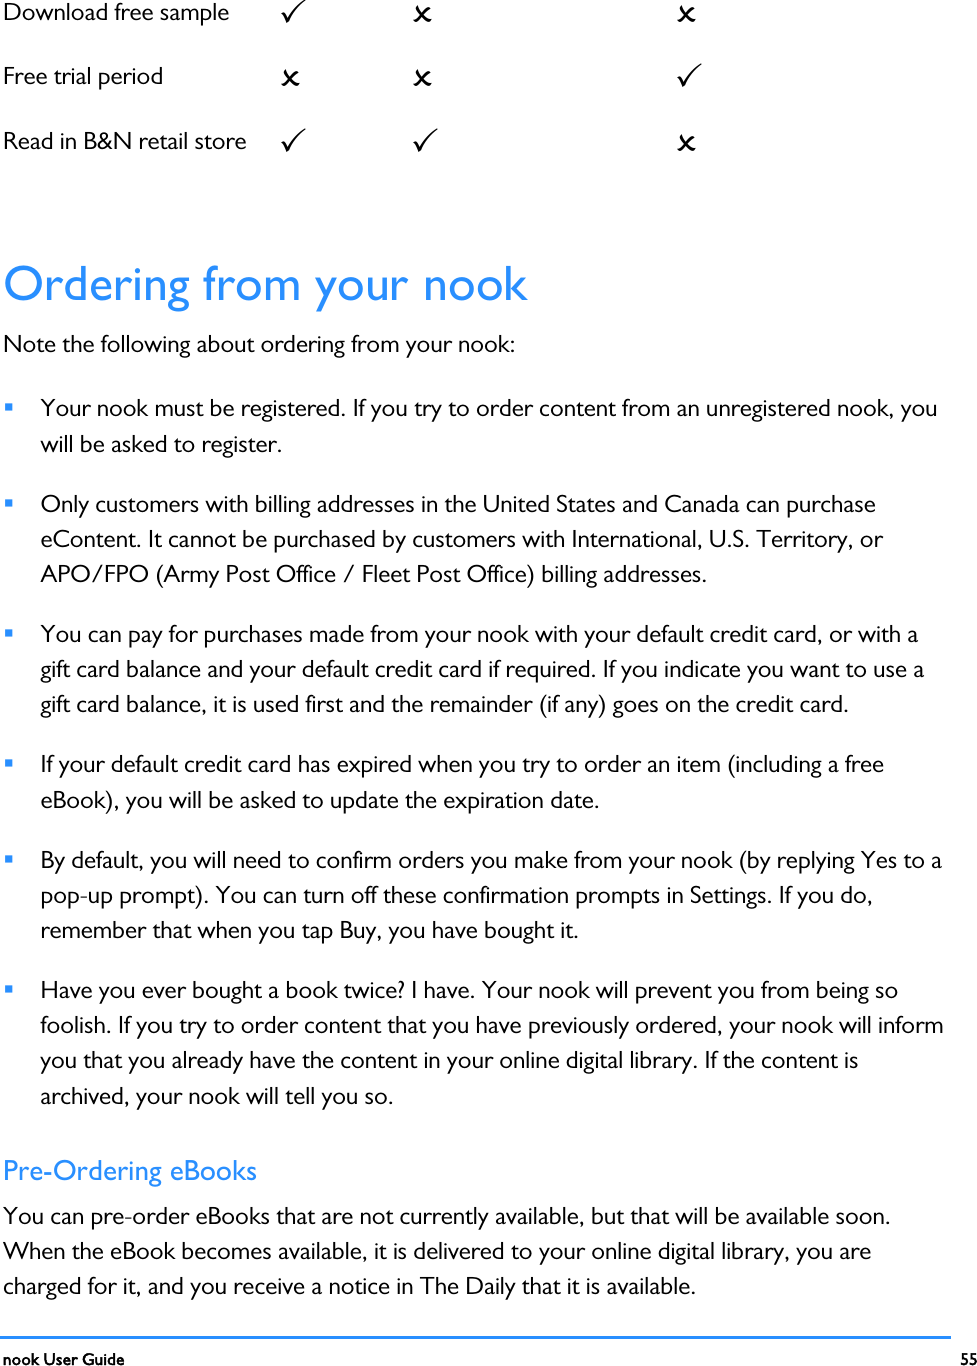  nook User Guide    55        Download free sample    Free trial period    Read in B&amp;N retail store     Ordering from your nook Note the following about ordering from your nook:  Your nook must be registered. If you try to order content from an unregistered nook, you will be asked to register.  Only customers with billing addresses in the United States and Canada can purchase eContent. It cannot be purchased by customers with International, U.S. Territory, or APO/FPO (Army Post Office / Fleet Post Office) billing addresses.   You can pay for purchases made from your nook with your default credit card, or with a gift card balance and your default credit card if required. If you indicate you want to use a gift card balance, it is used first and the remainder (if any) goes on the credit card.   If your default credit card has expired when you try to order an item (including a free eBook), you will be asked to update the expiration date.   By default, you will need to confirm orders you make from your nook (by replying Yes to a pop-up prompt). You can turn off these confirmation prompts in Settings. If you do, remember that when you tap Buy, you have bought it.   Have you ever bought a book twice? I have. Your nook will prevent you from being so foolish. If you try to order content that you have previously ordered, your nook will inform you that you already have the content in your online digital library. If the content is archived, your nook will tell you so. Pre-Ordering eBooks You can pre-order eBooks that are not currently available, but that will be available soon. When the eBook becomes available, it is delivered to your online digital library, you are charged for it, and you receive a notice in The Daily that it is available. 